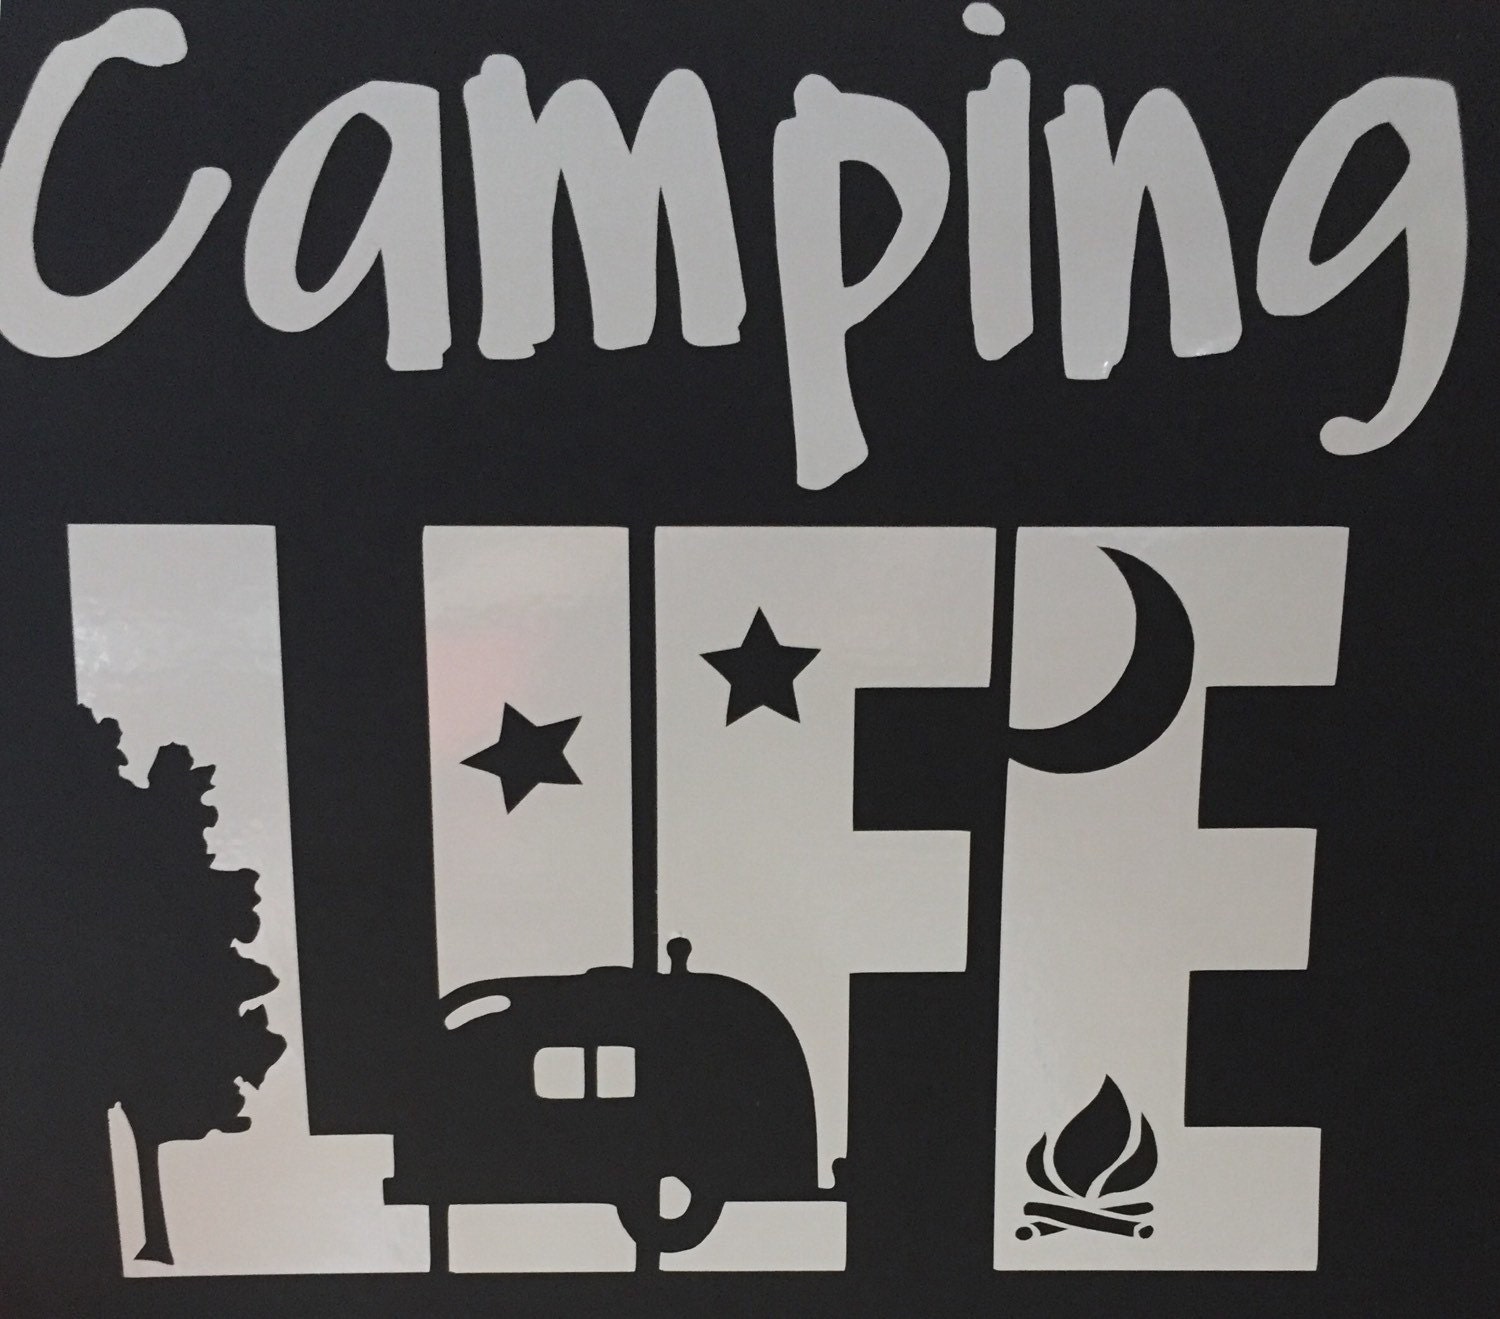 Download Camping Life Vinyl Decal Perfect for RV Camper or Car